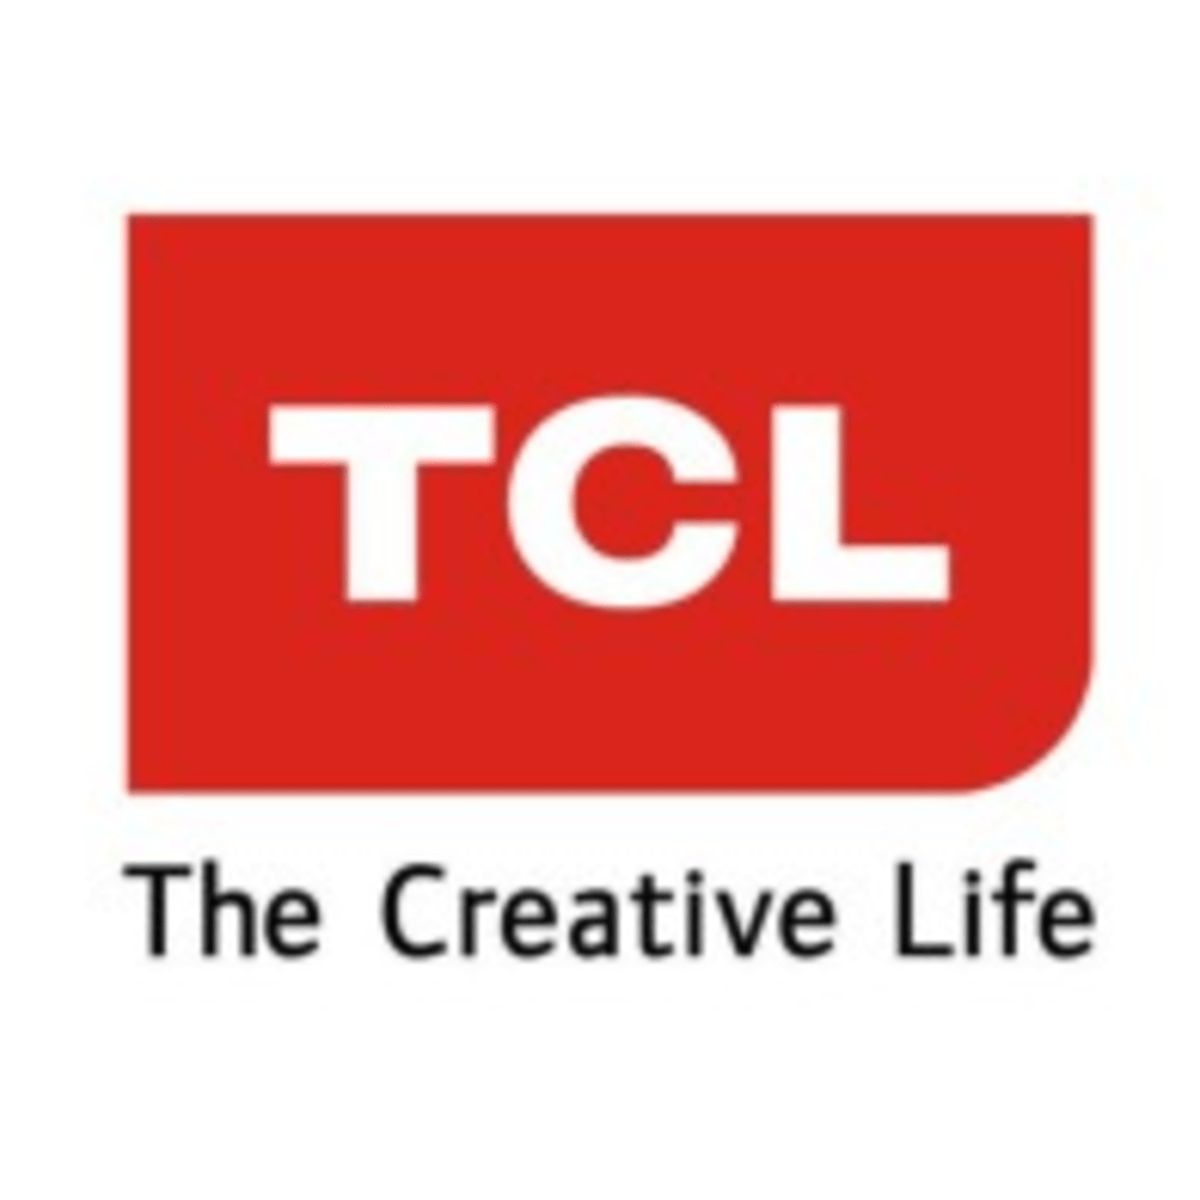 QD Logo - TCL Releases QD TV Line In China